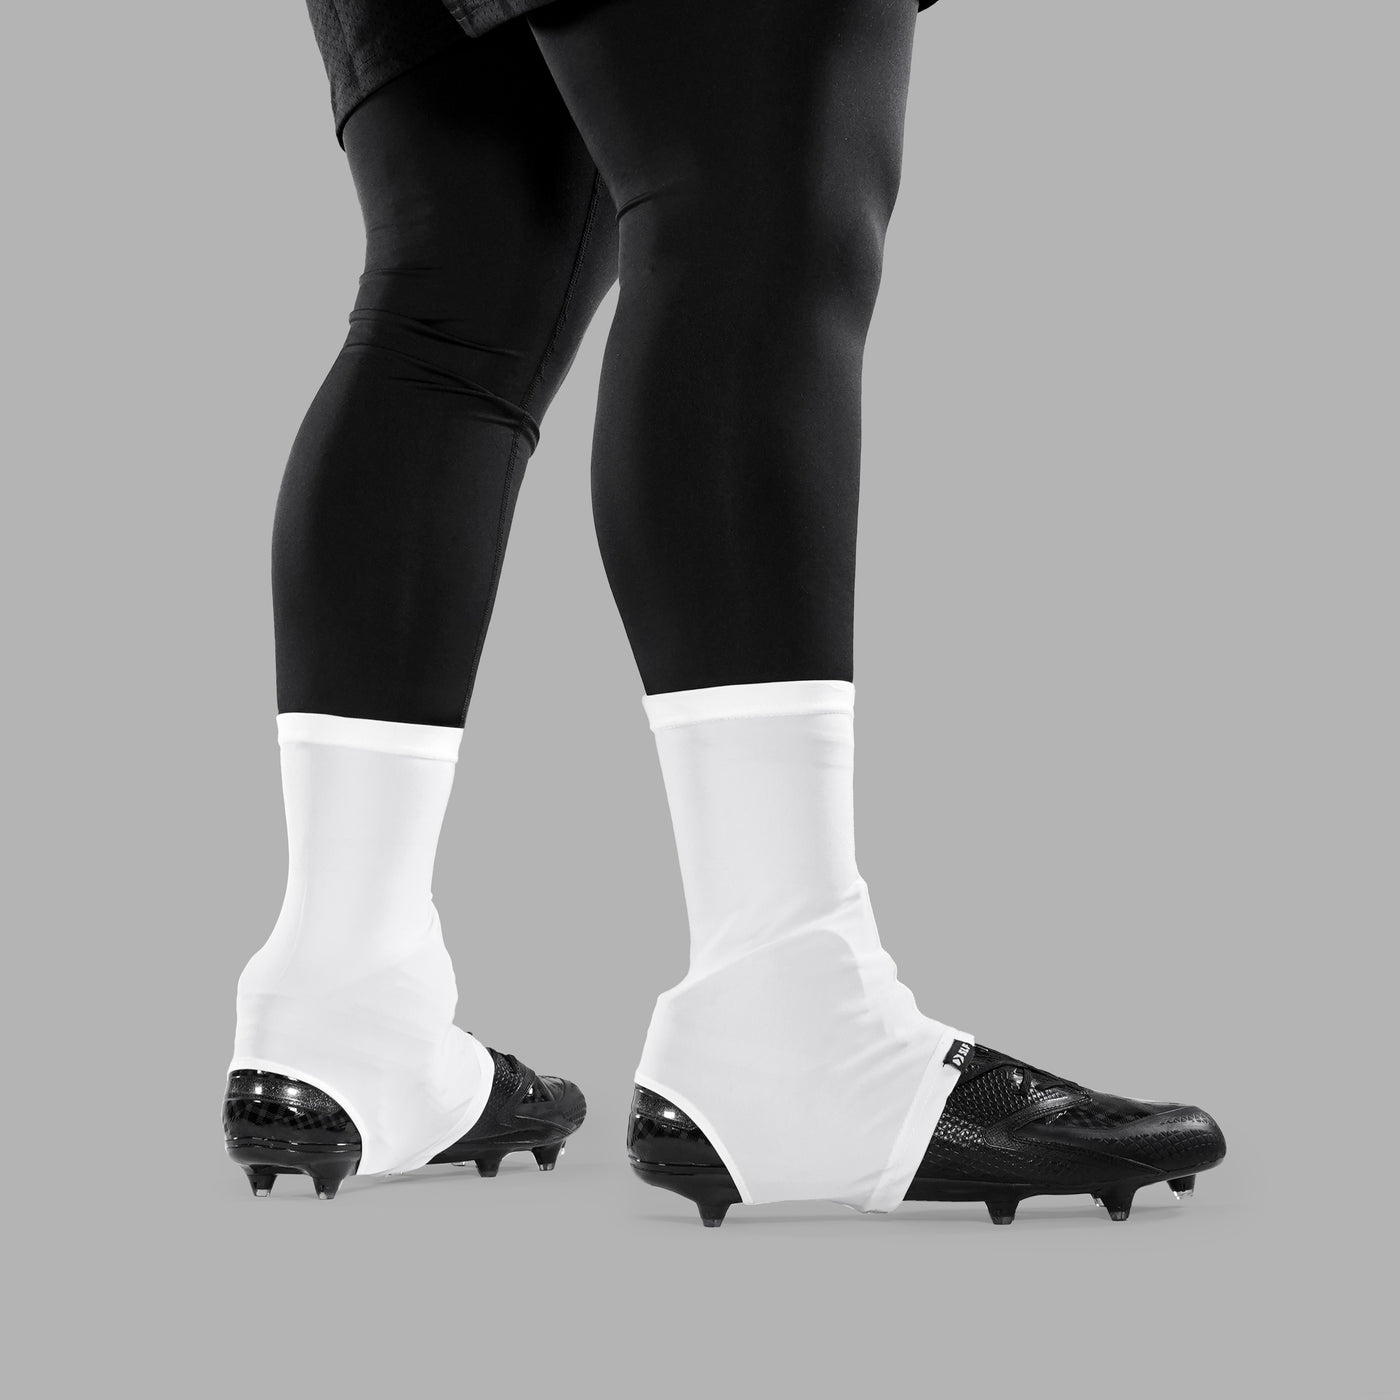 Basic White Spats / Cleat Covers - Big